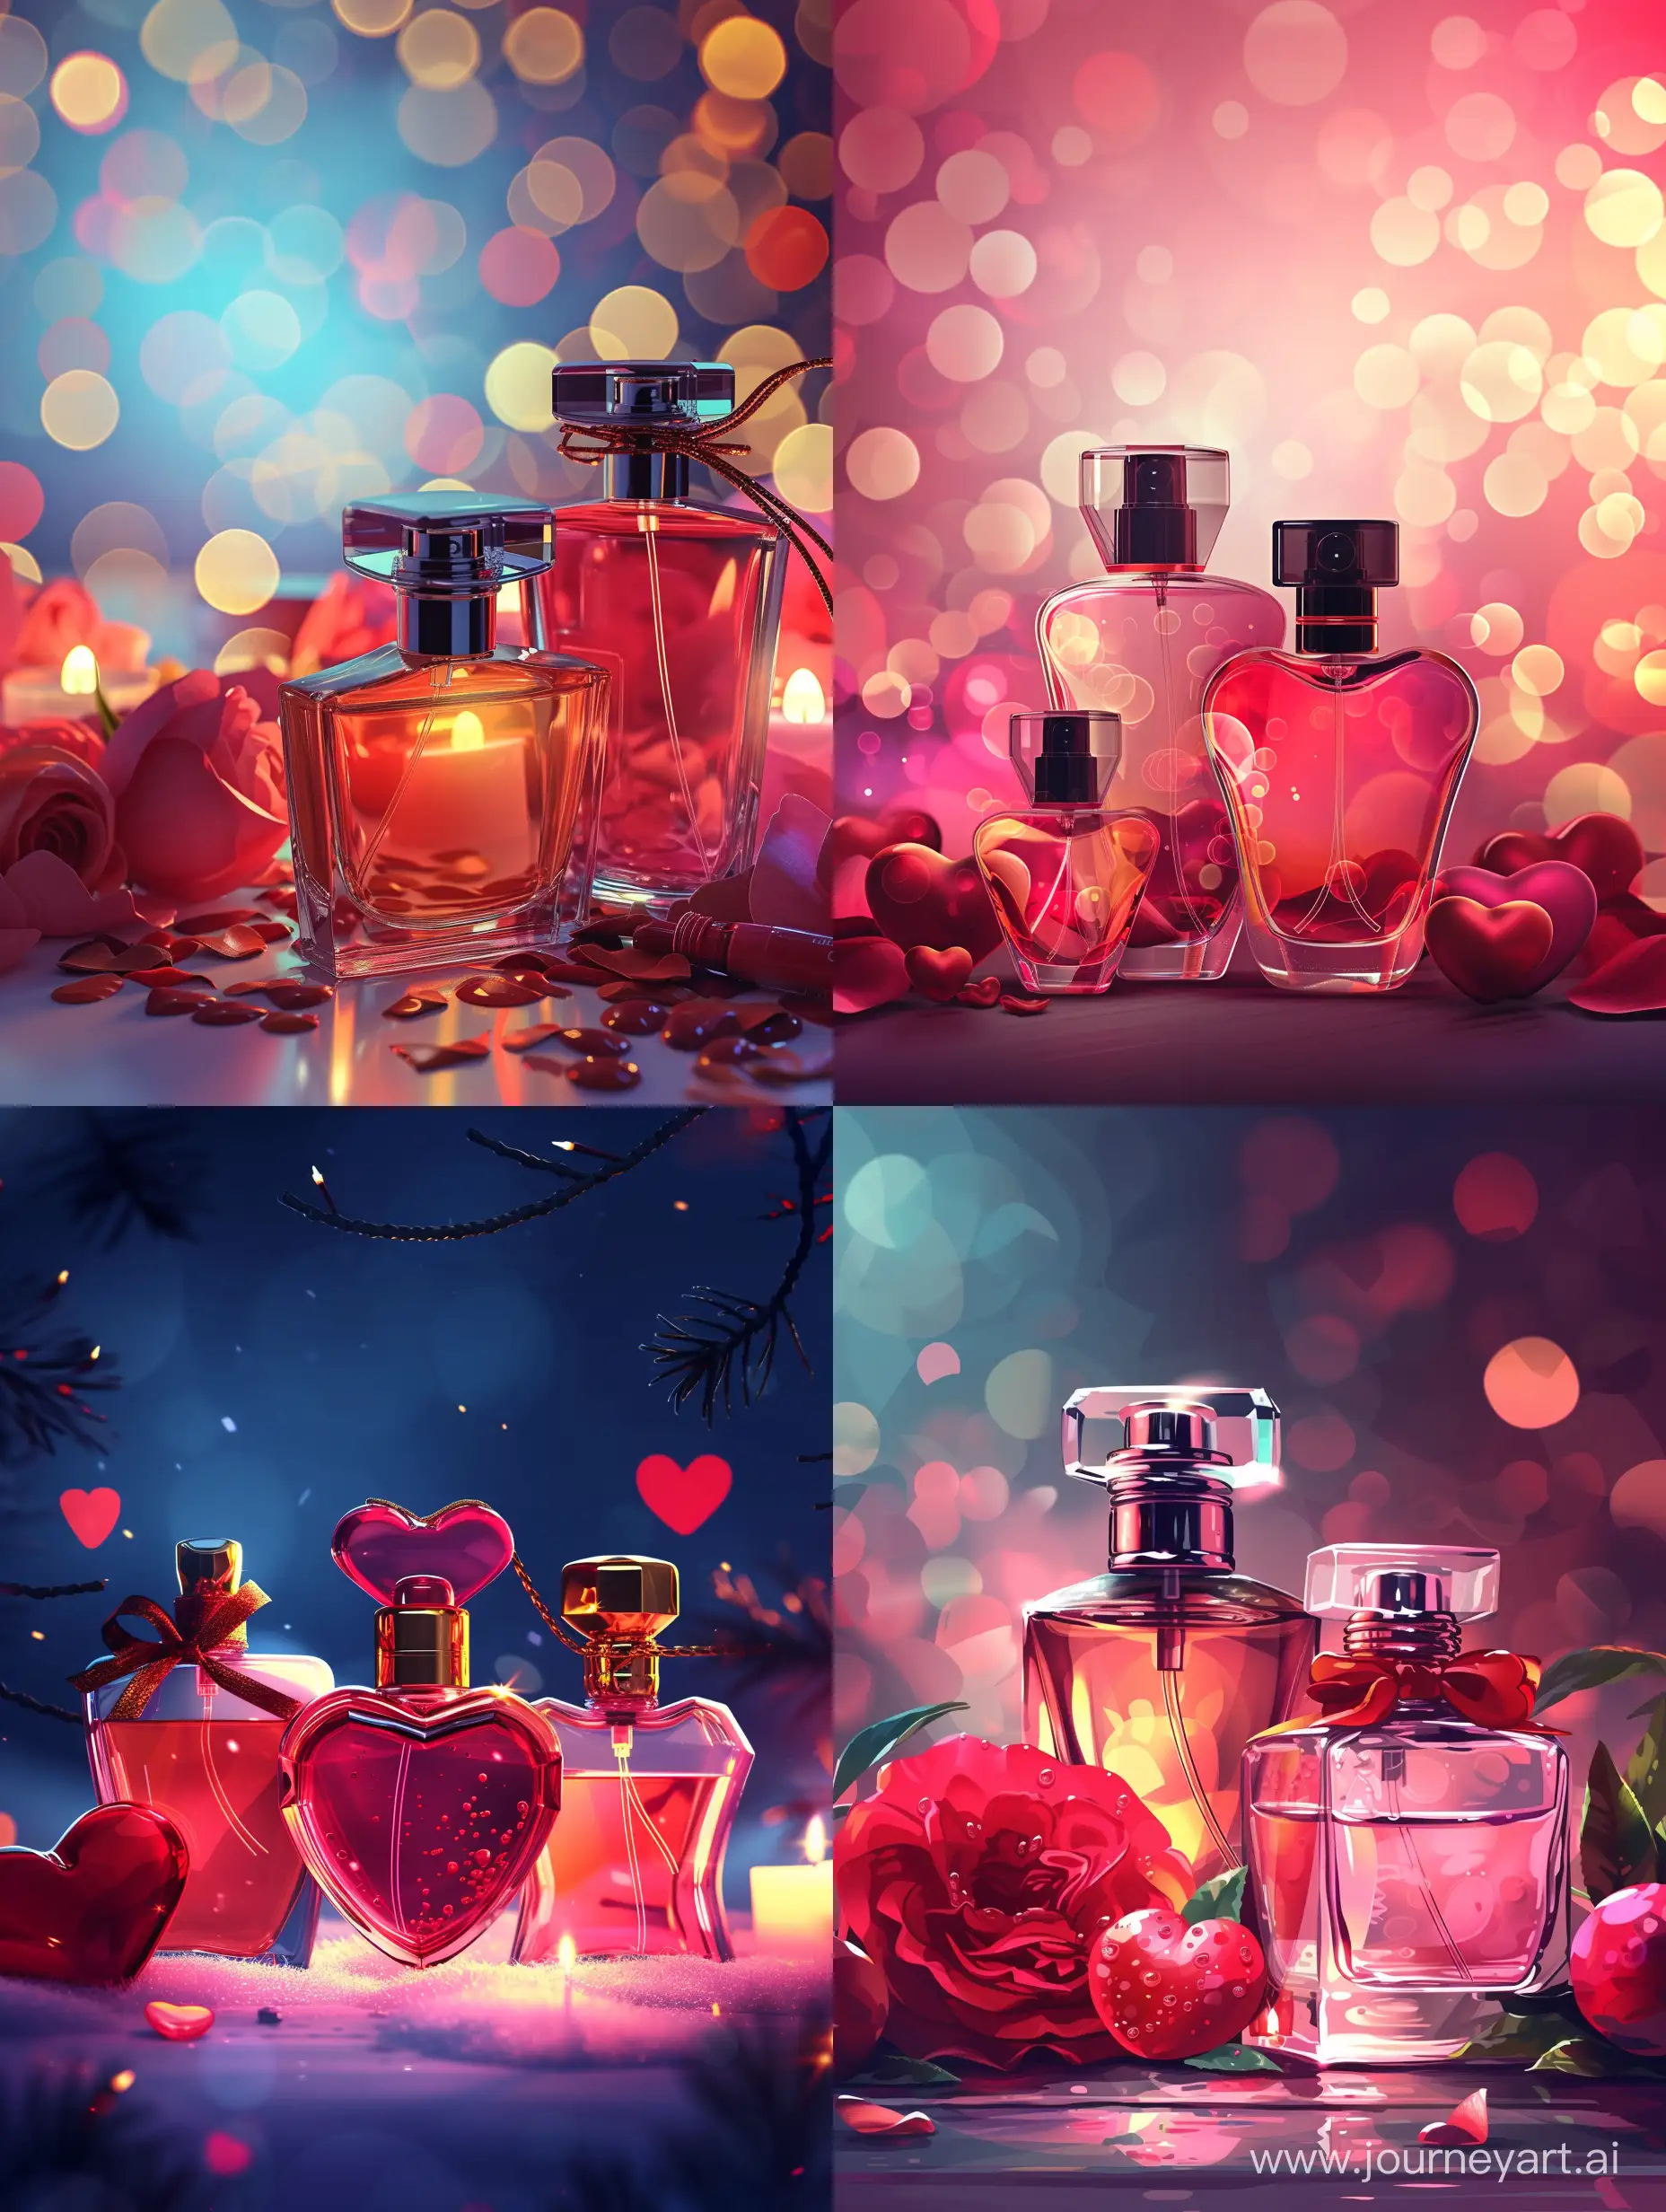 Exquisite-Valentines-Day-Perfume-Bottles-and-Cosmetics-in-Festive-Atmosphere